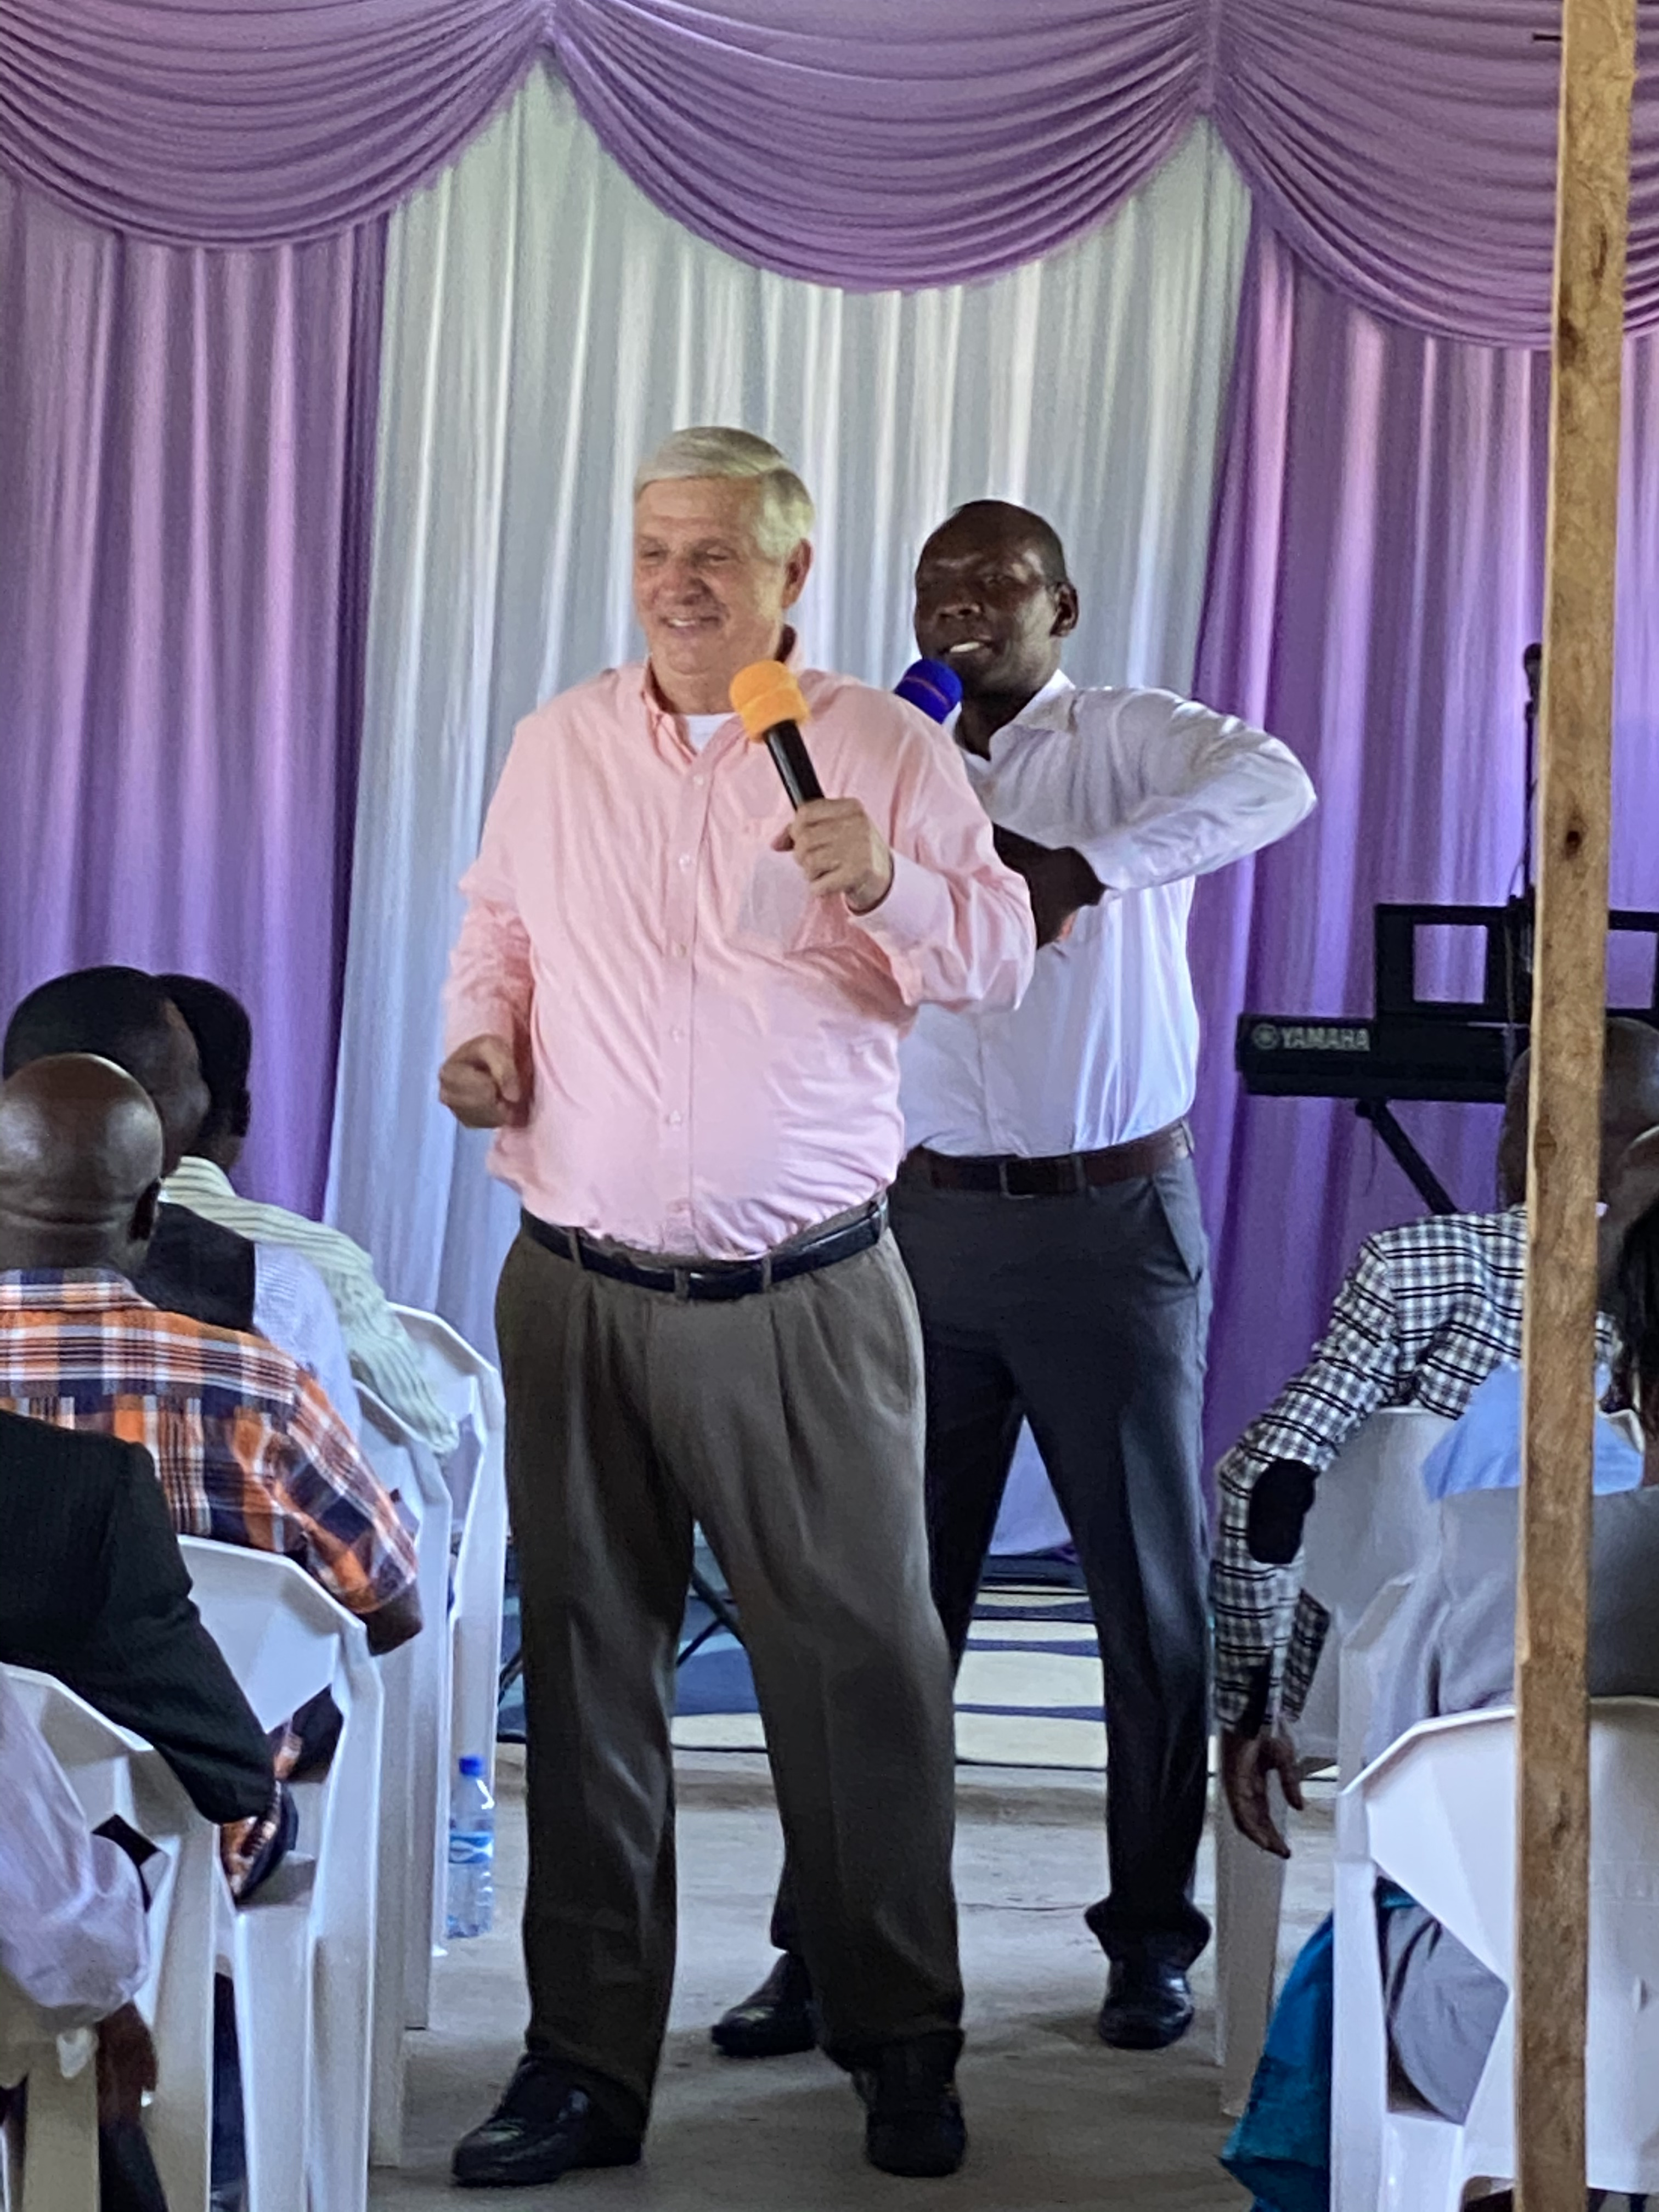 Apostle John with interpreter Gabiel Kole at Crossroads church in Kisumu.   Demonstrating some in the pulpit "strut like a banty rooster"!!  You just had to hear the message :-)